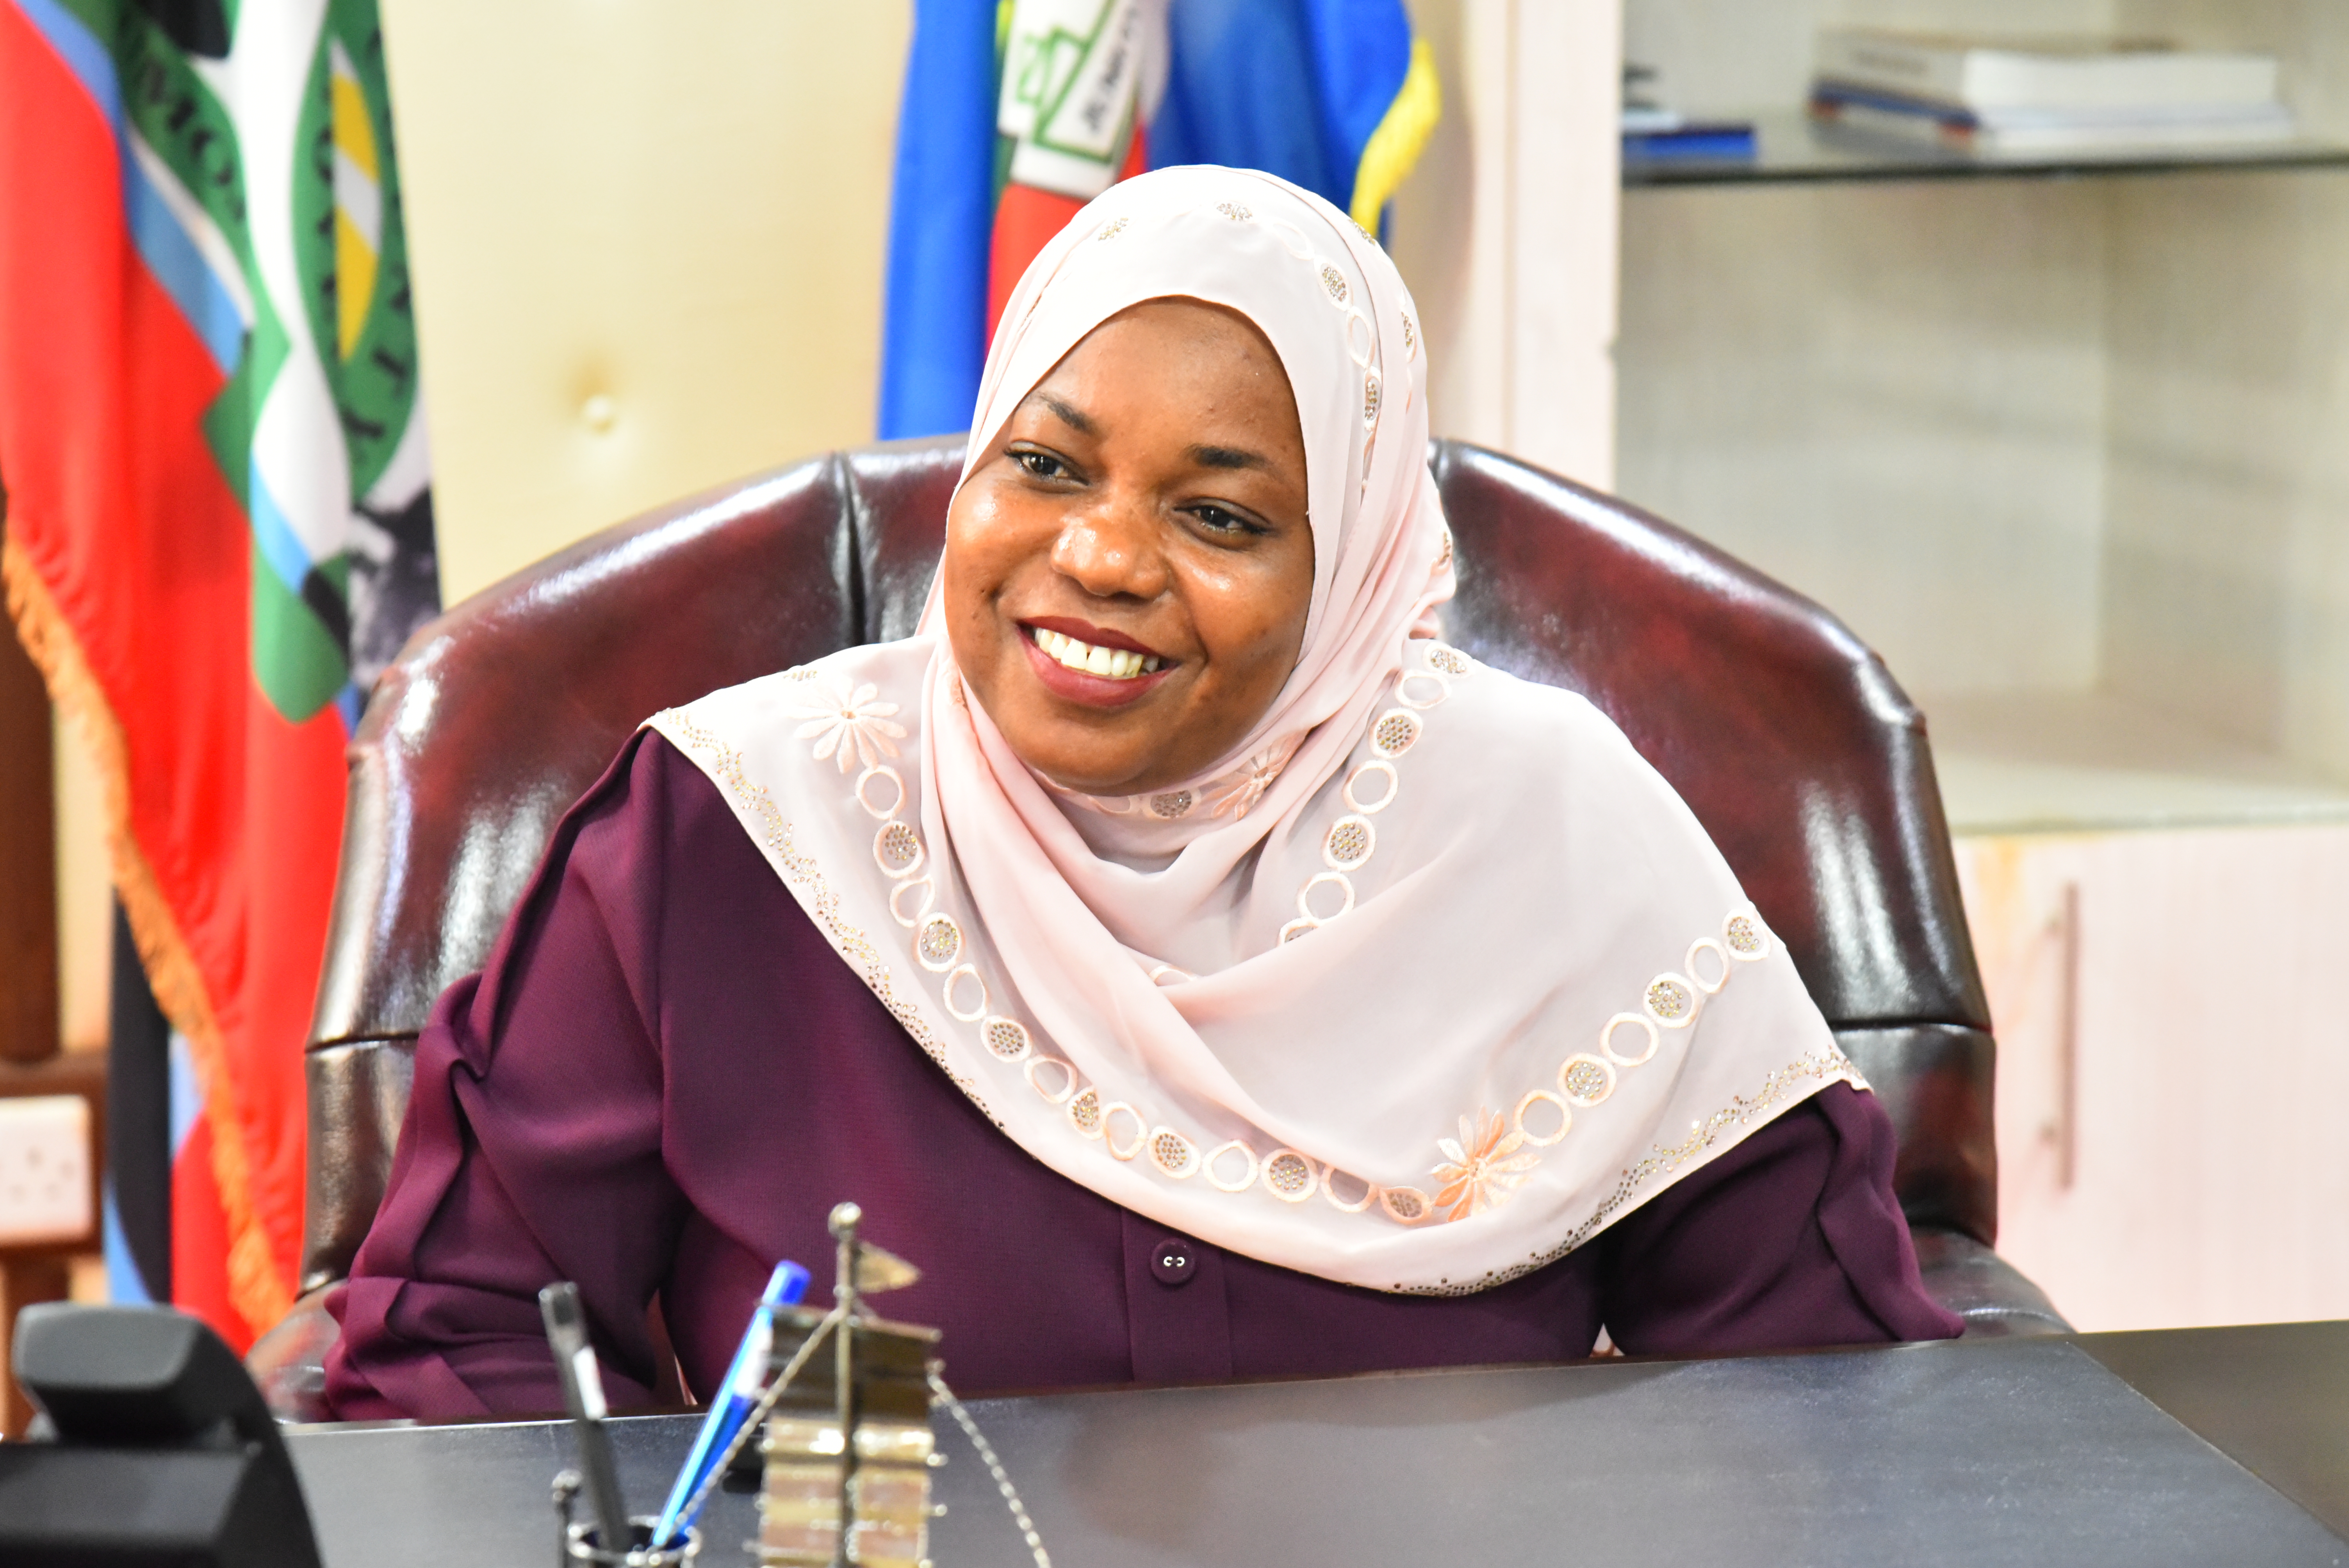 Prior to politics Governor Fatuma Achani was provided legal counsel, supporting civic education on Kenya’s 2010 Constitution,  before being chosen in 2013 election race to be the sitting governor’s running mate. Photo: UN Women/Luke Horswell